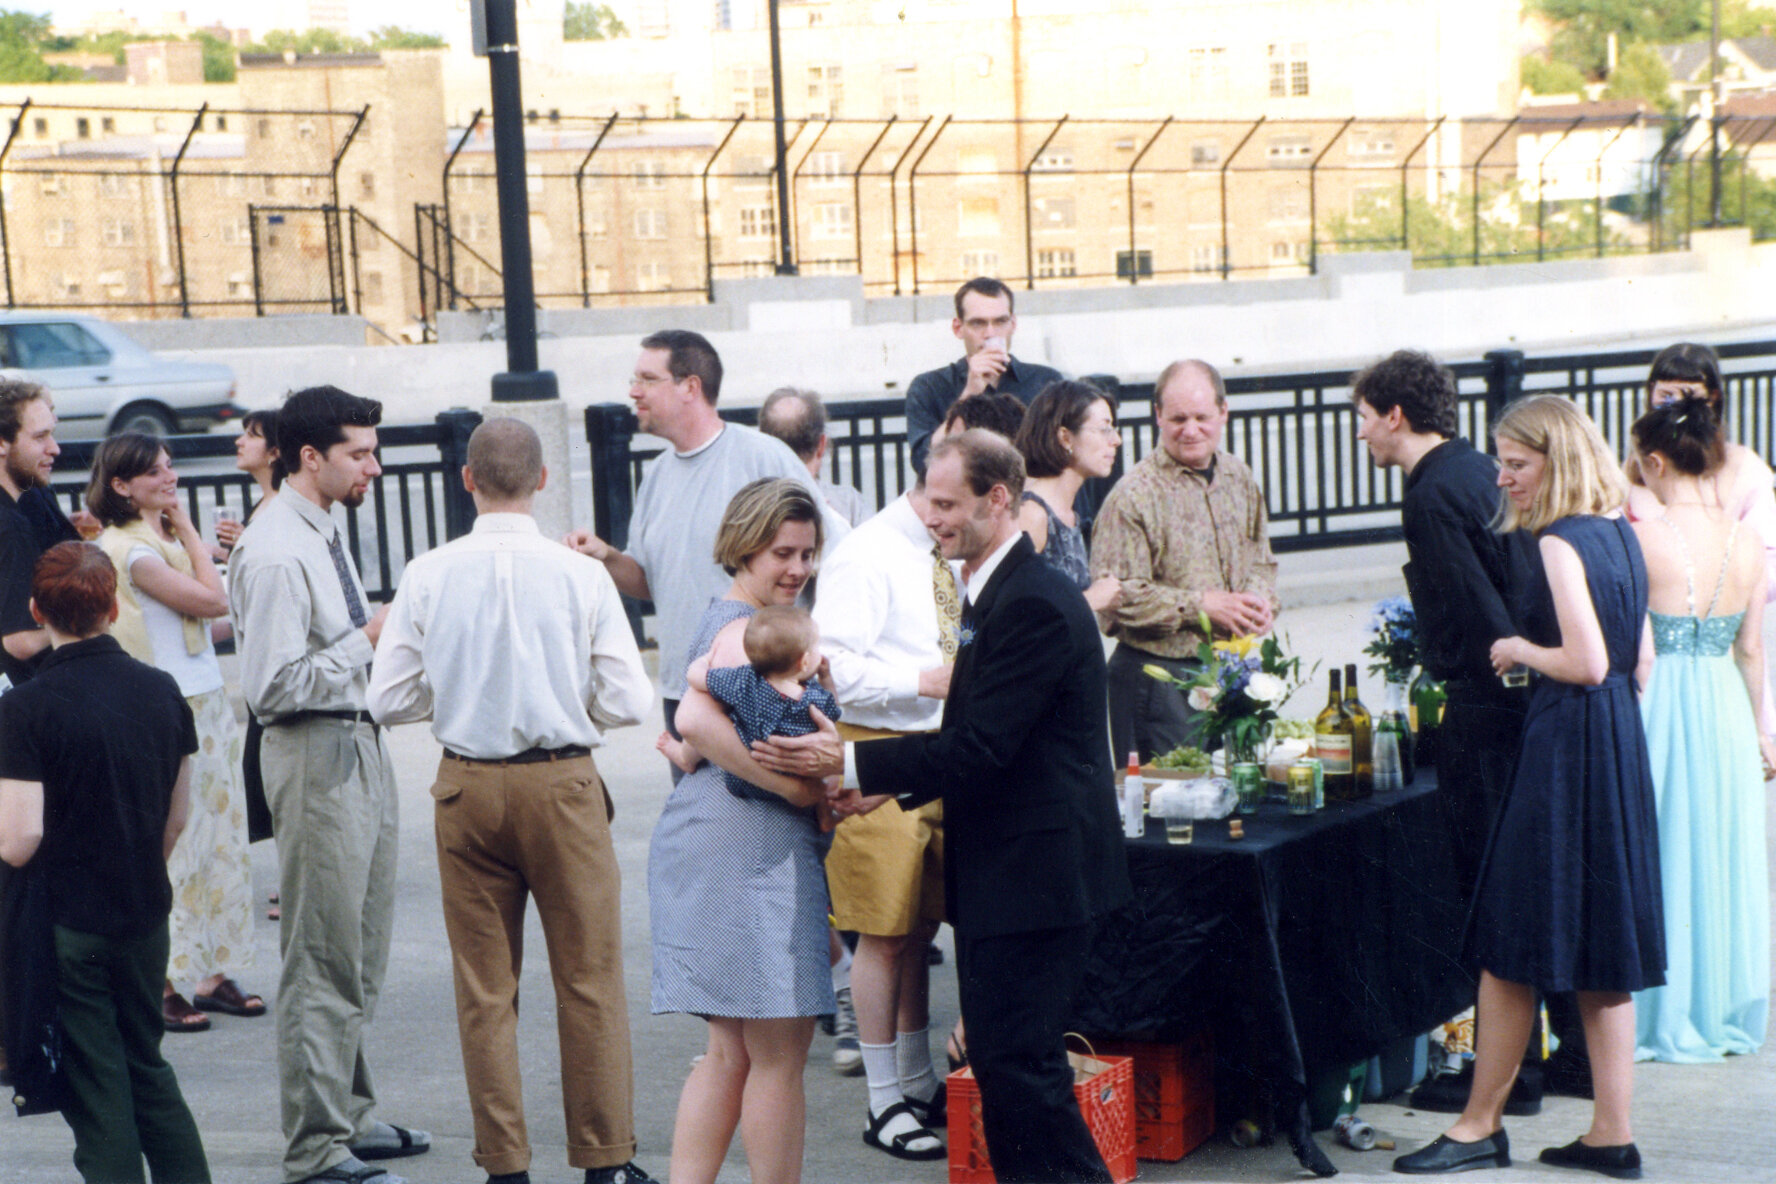 People in formal attire gathered around table with black tablecloth refreshments on it. In foreground, woman hands man baby.